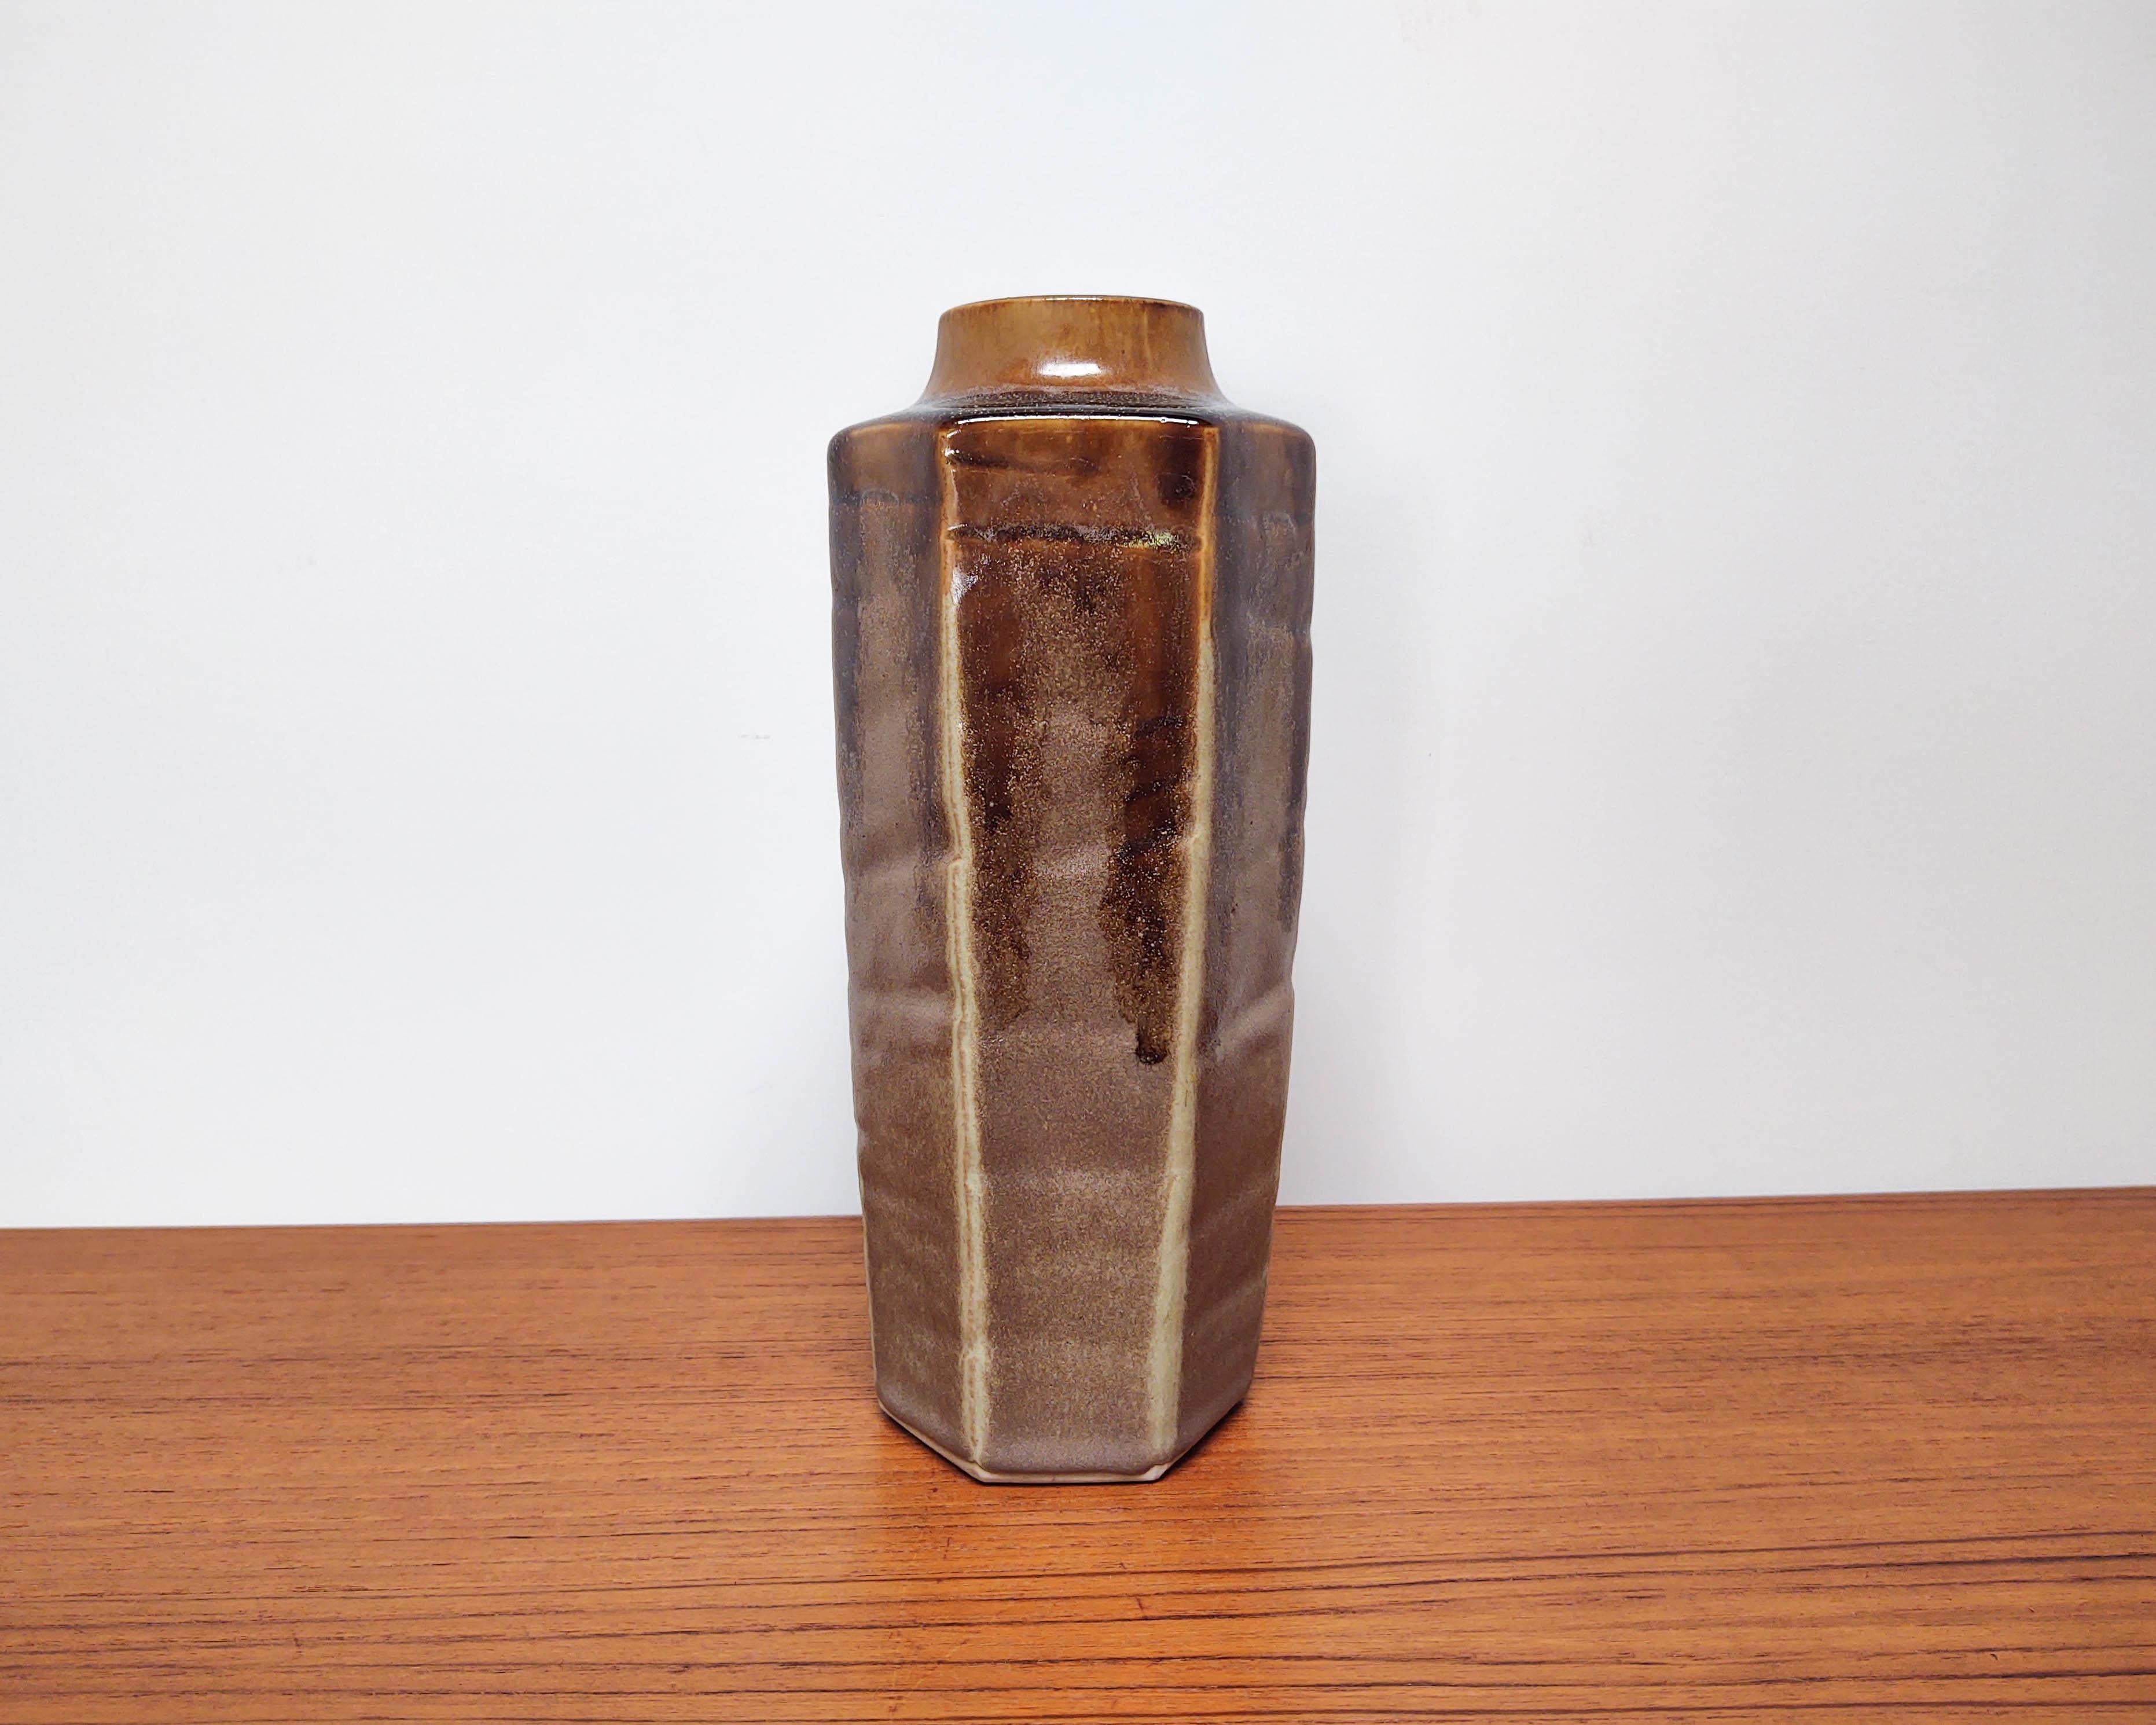 Tall hexagonal wheel-thrown vase made of porcelain, then altered into a hexagonal shape by carving the sides. Glossy dark brown glaze dripping over an earthy speckled matte glaze. No marking, carved foot.

Measures: 9.5